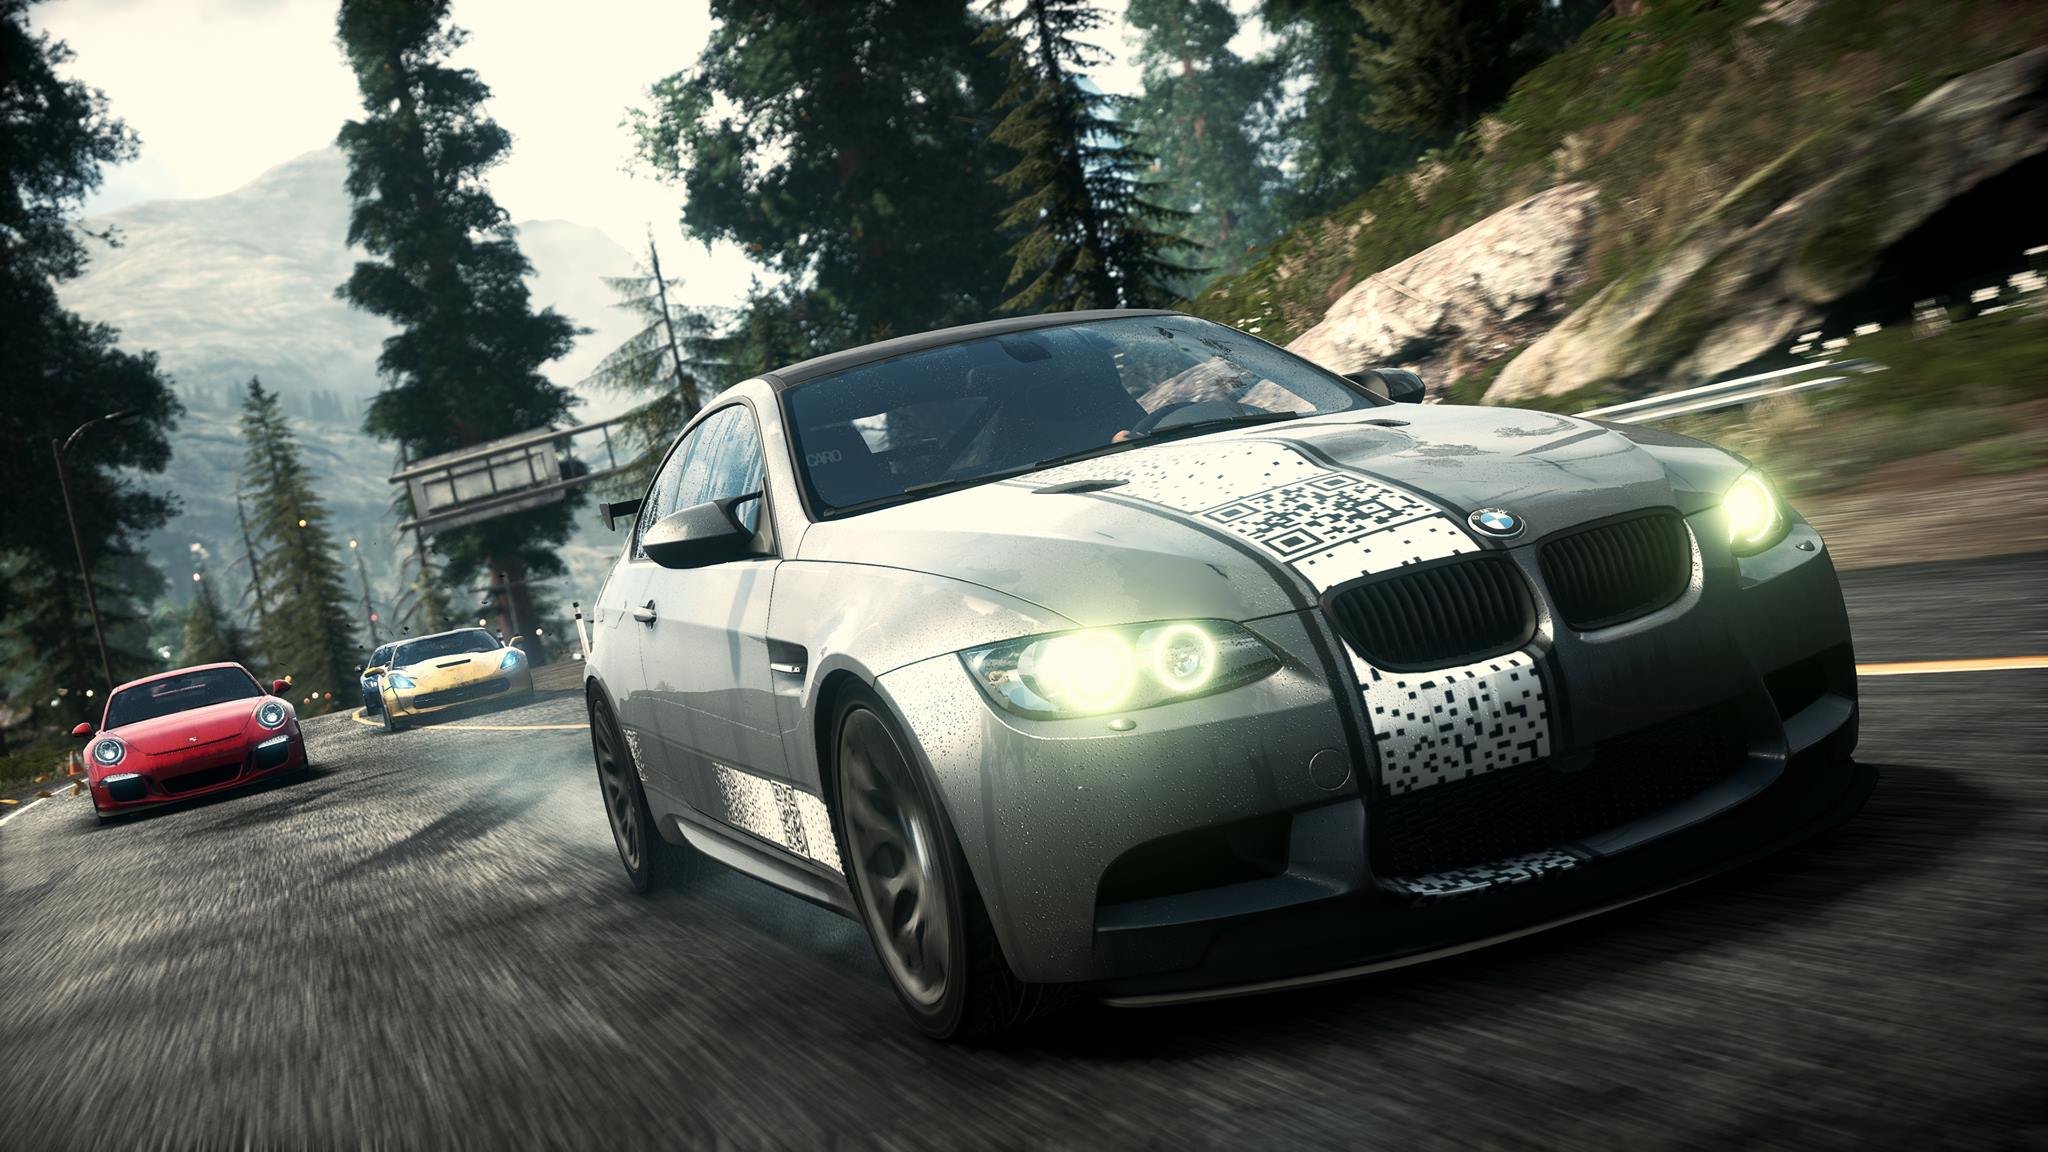 Need for Speed Rivals Xbox 360. Need for Speed Rivals BMW m3 GTR. Игра NFS Rivals. Need for Speed Rivals 2013. Нид фор спид версии игры